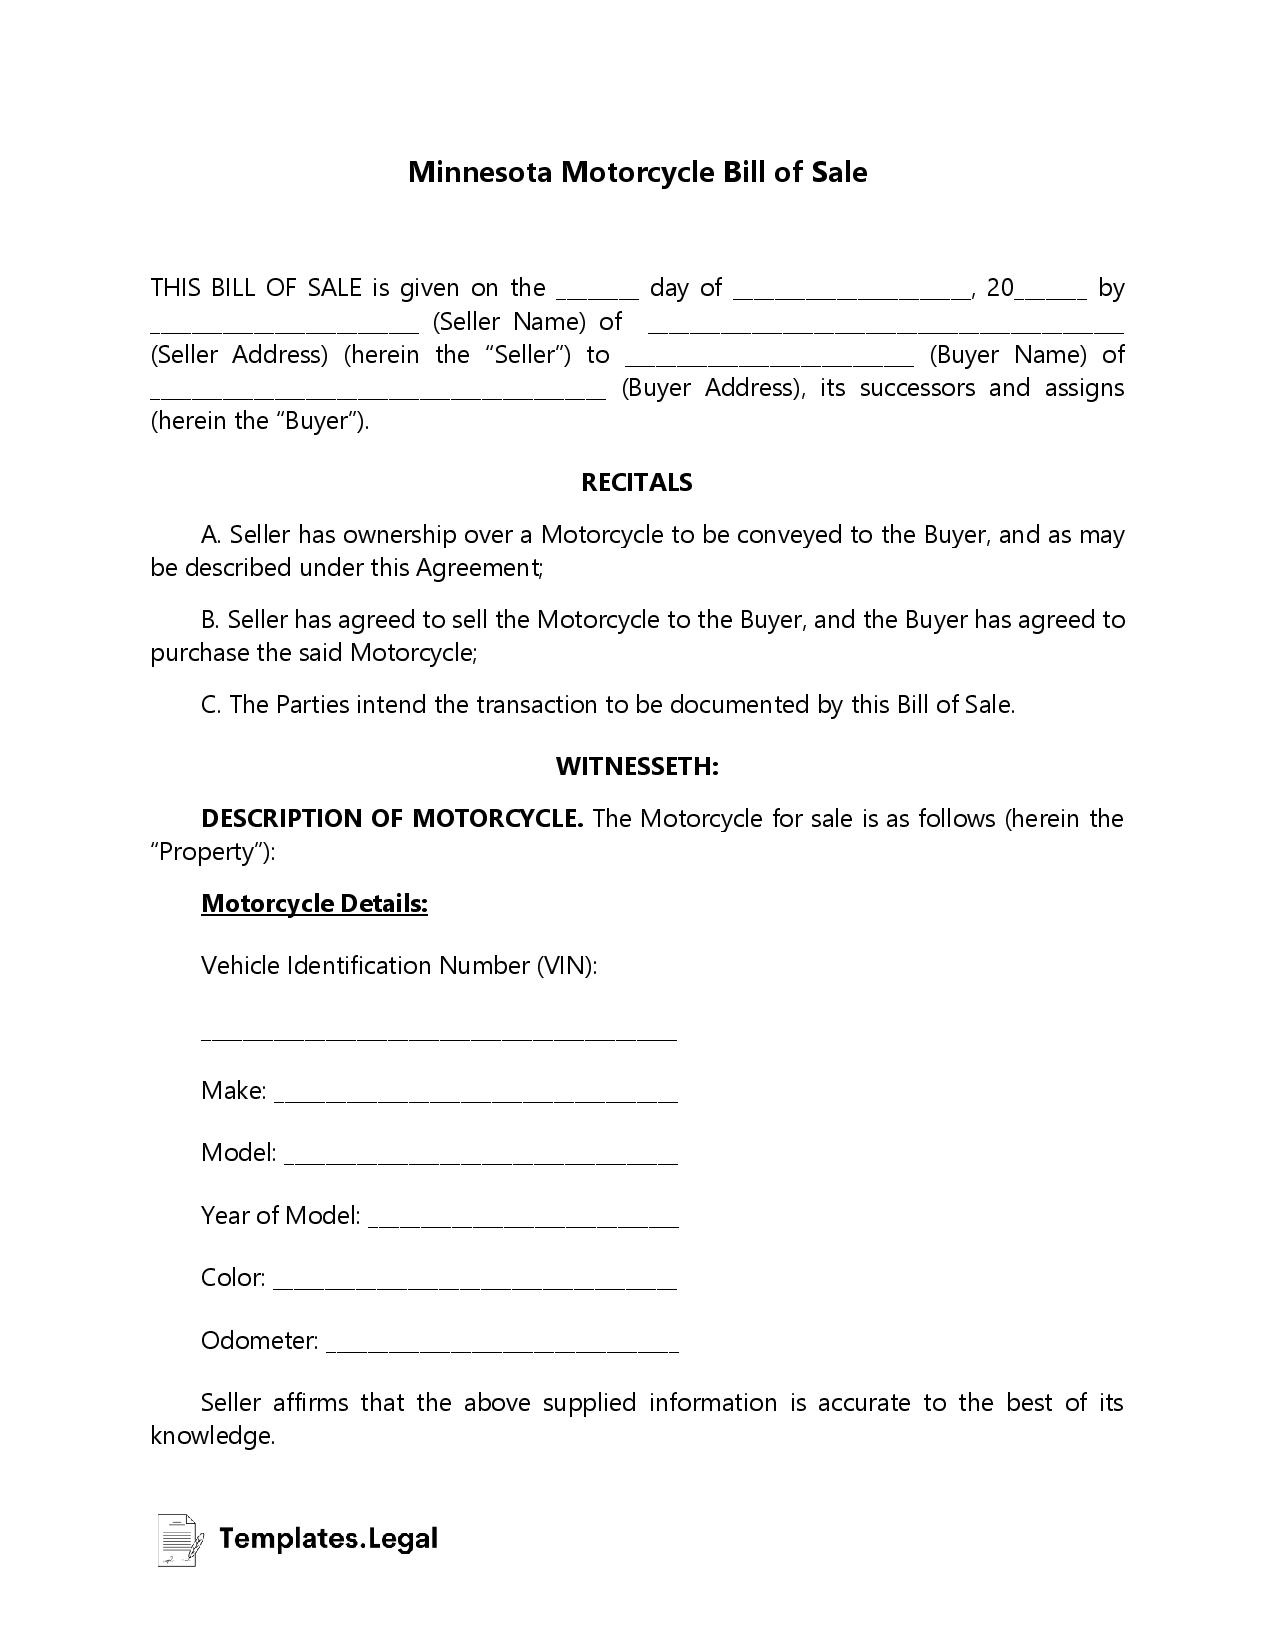 Minnesota Motorcycle Bill of Sale - Templates.Legal